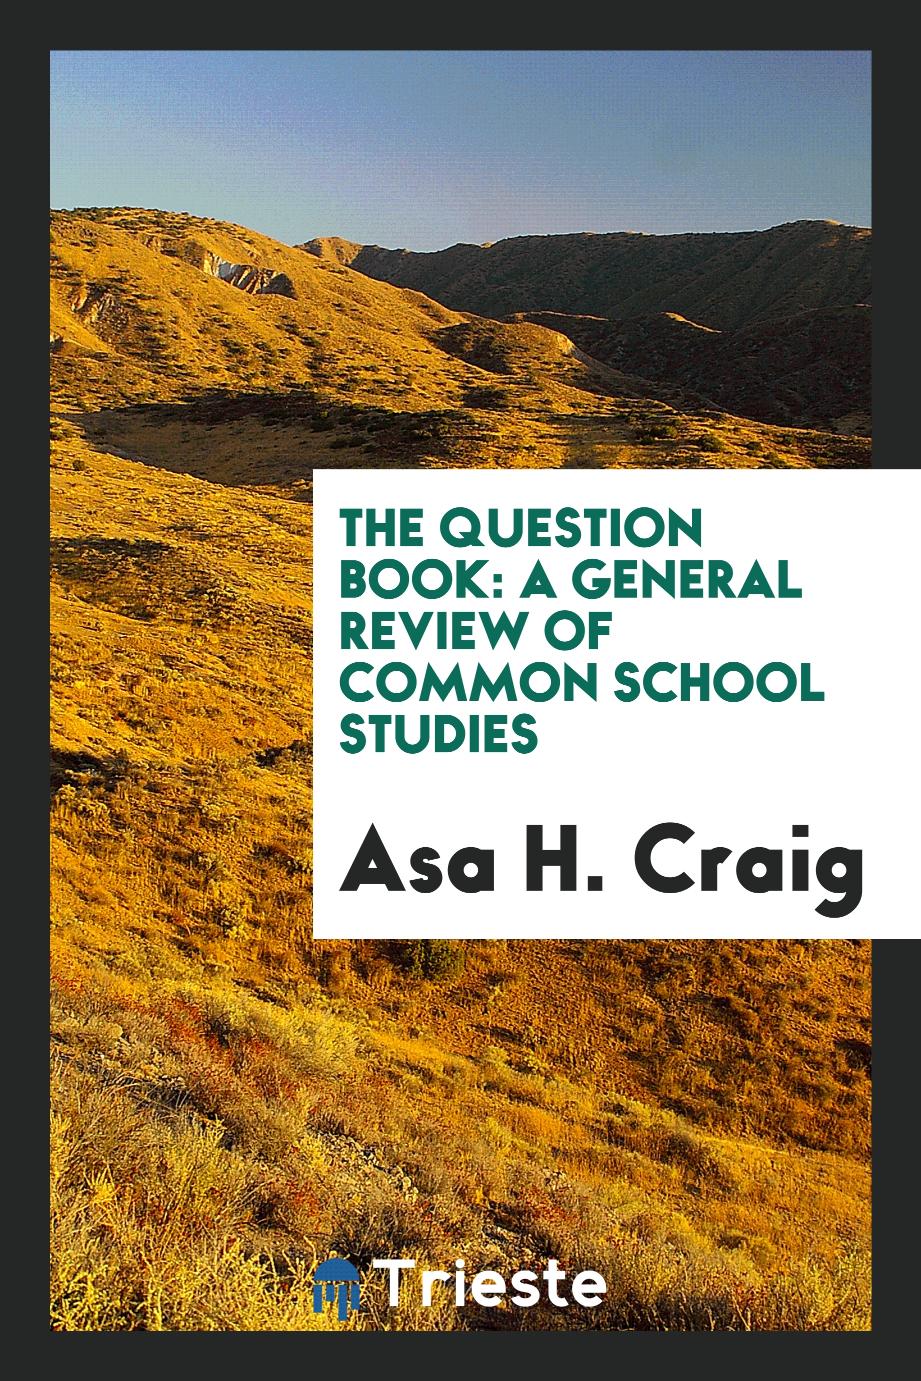 The question book: a general review of common school studies